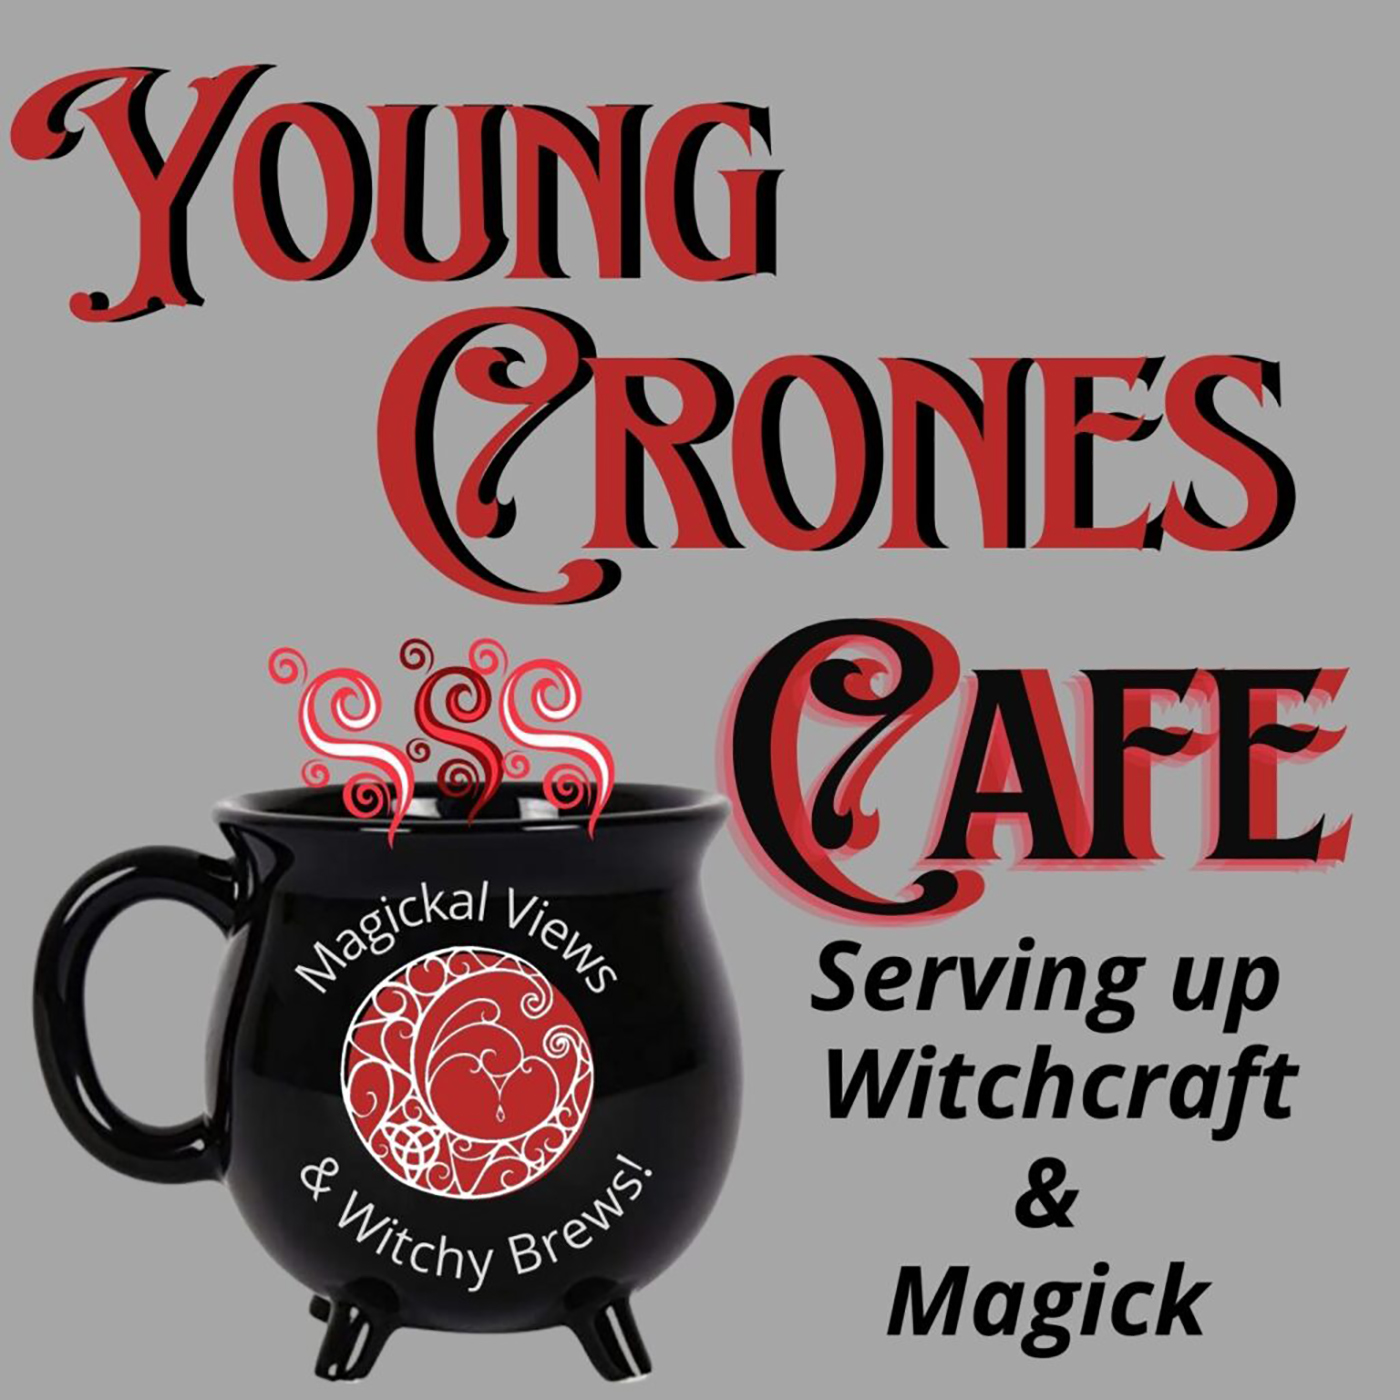 Serving Up Witchcraft & Magick at the Young Crones Cafe